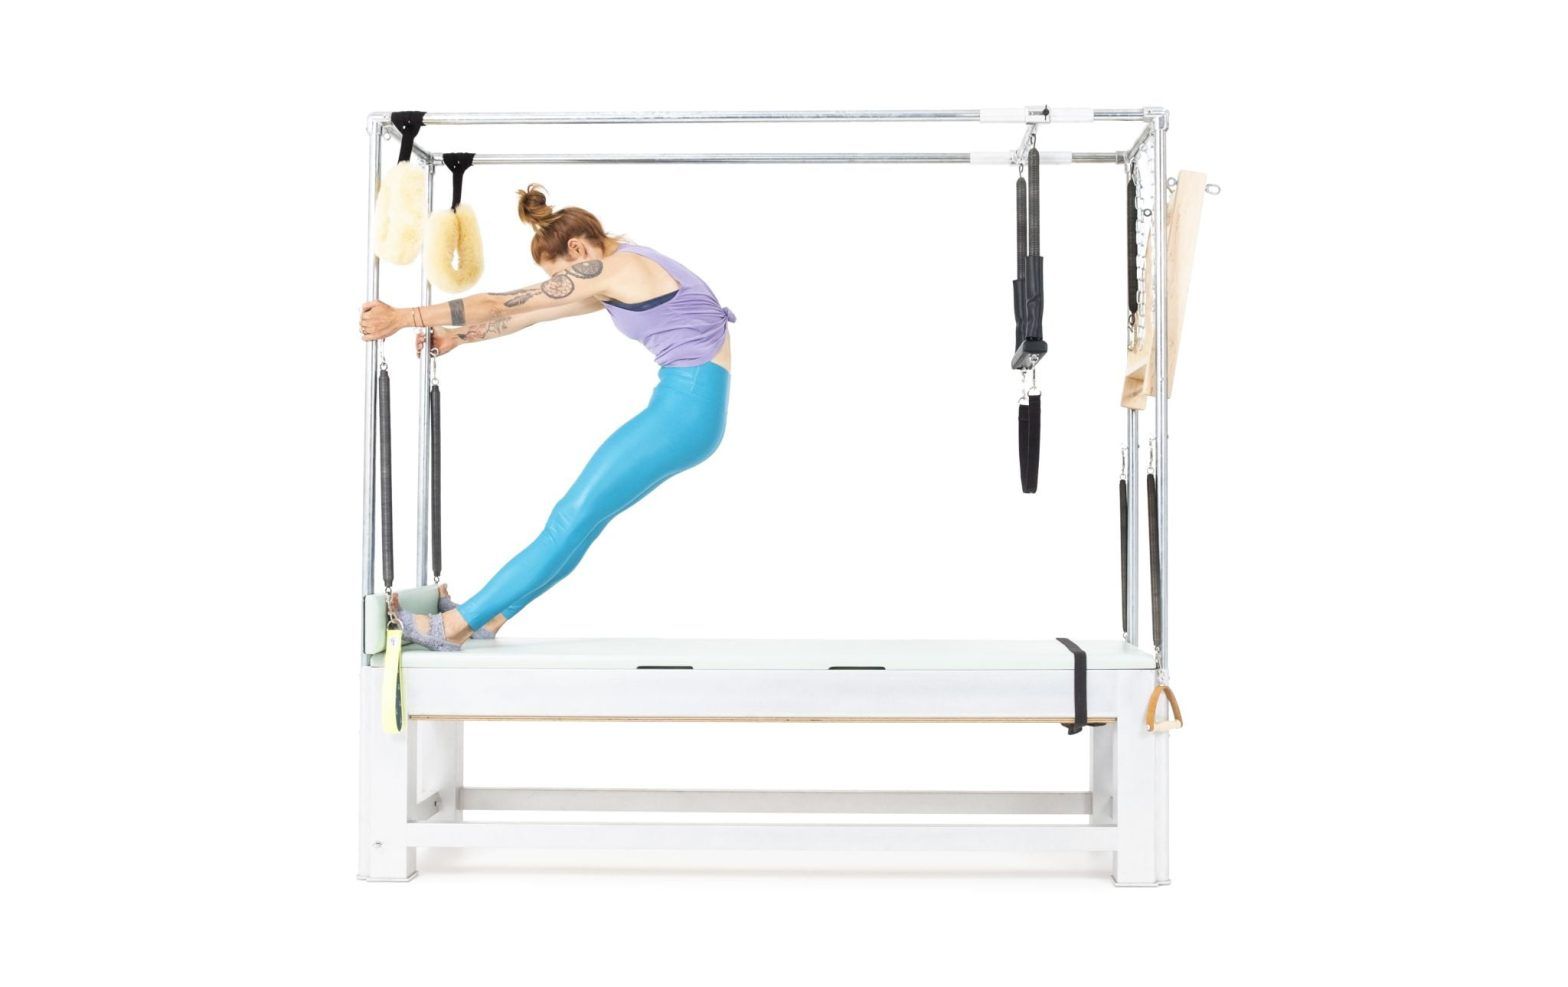 Spread Eagle on the Cadillac or Tower Online Pilates Classes